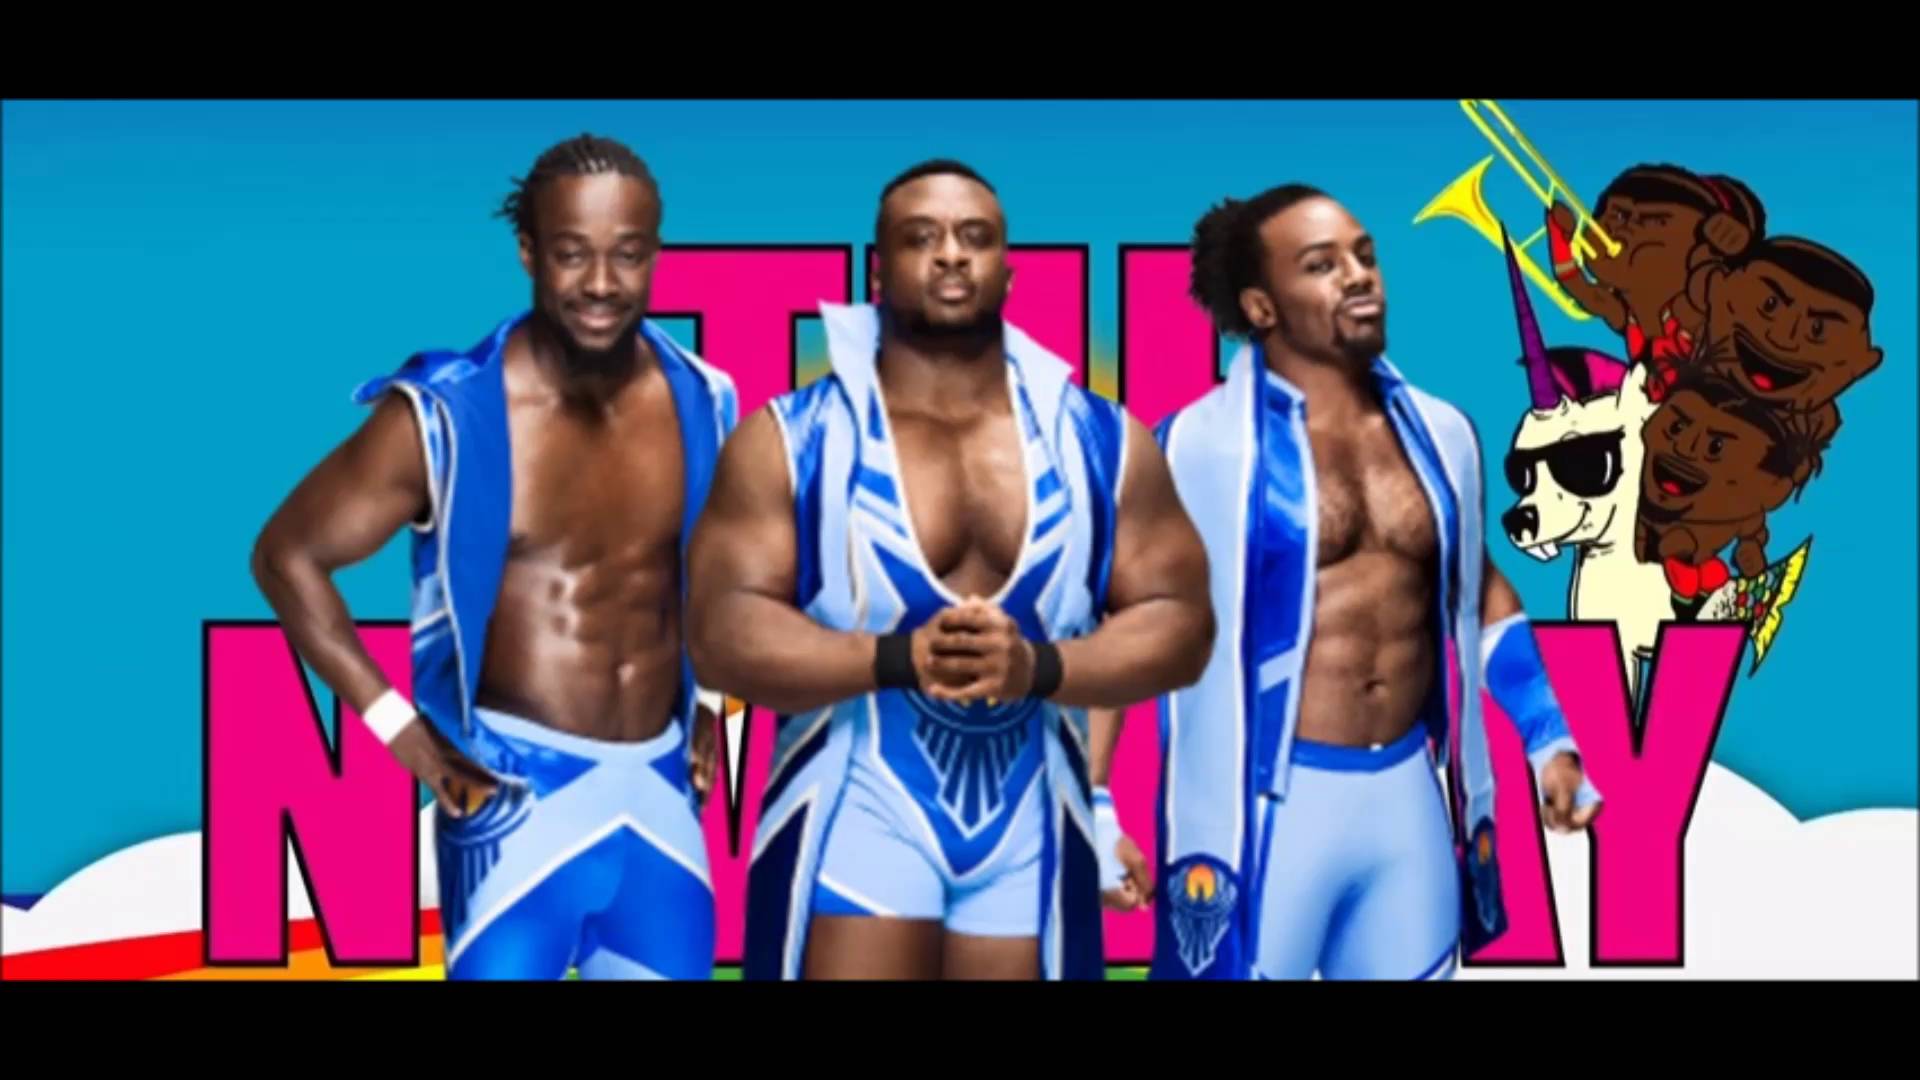 WWE The New Day 2nd Theme Song New Day, New Way 2016 with Big E